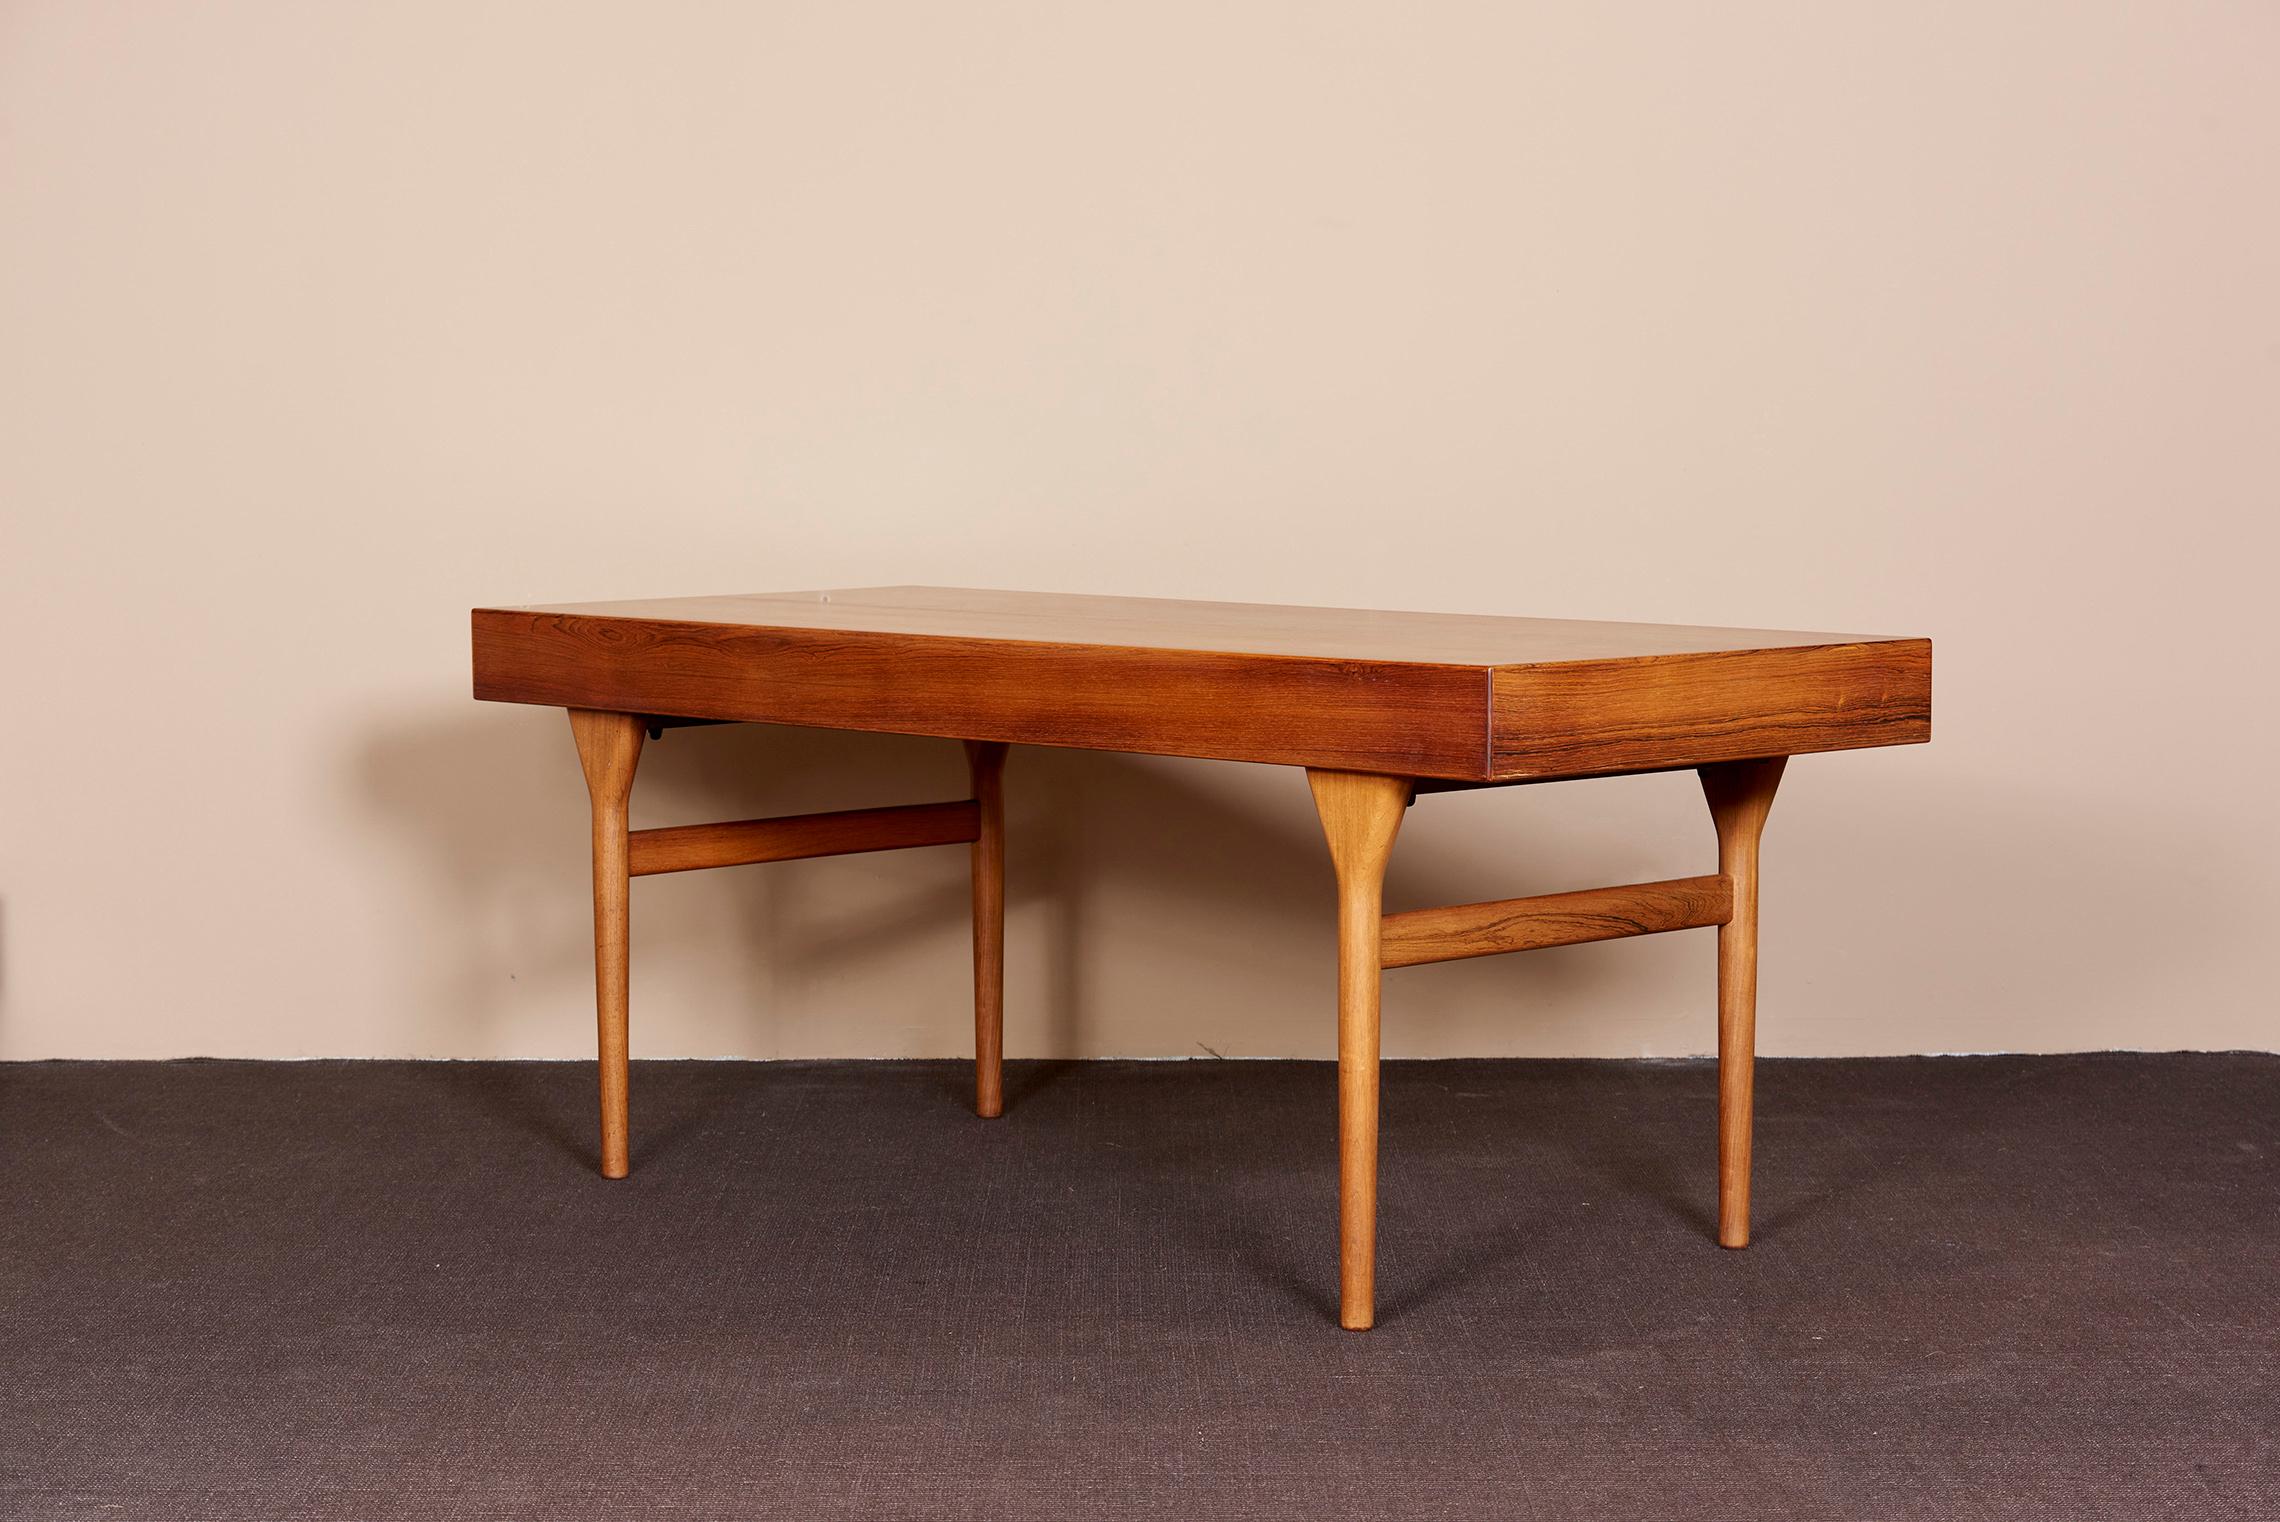 Mid-20th Century Desk with Four Drawers by Nanna Ditzel, Denmark, 1950s